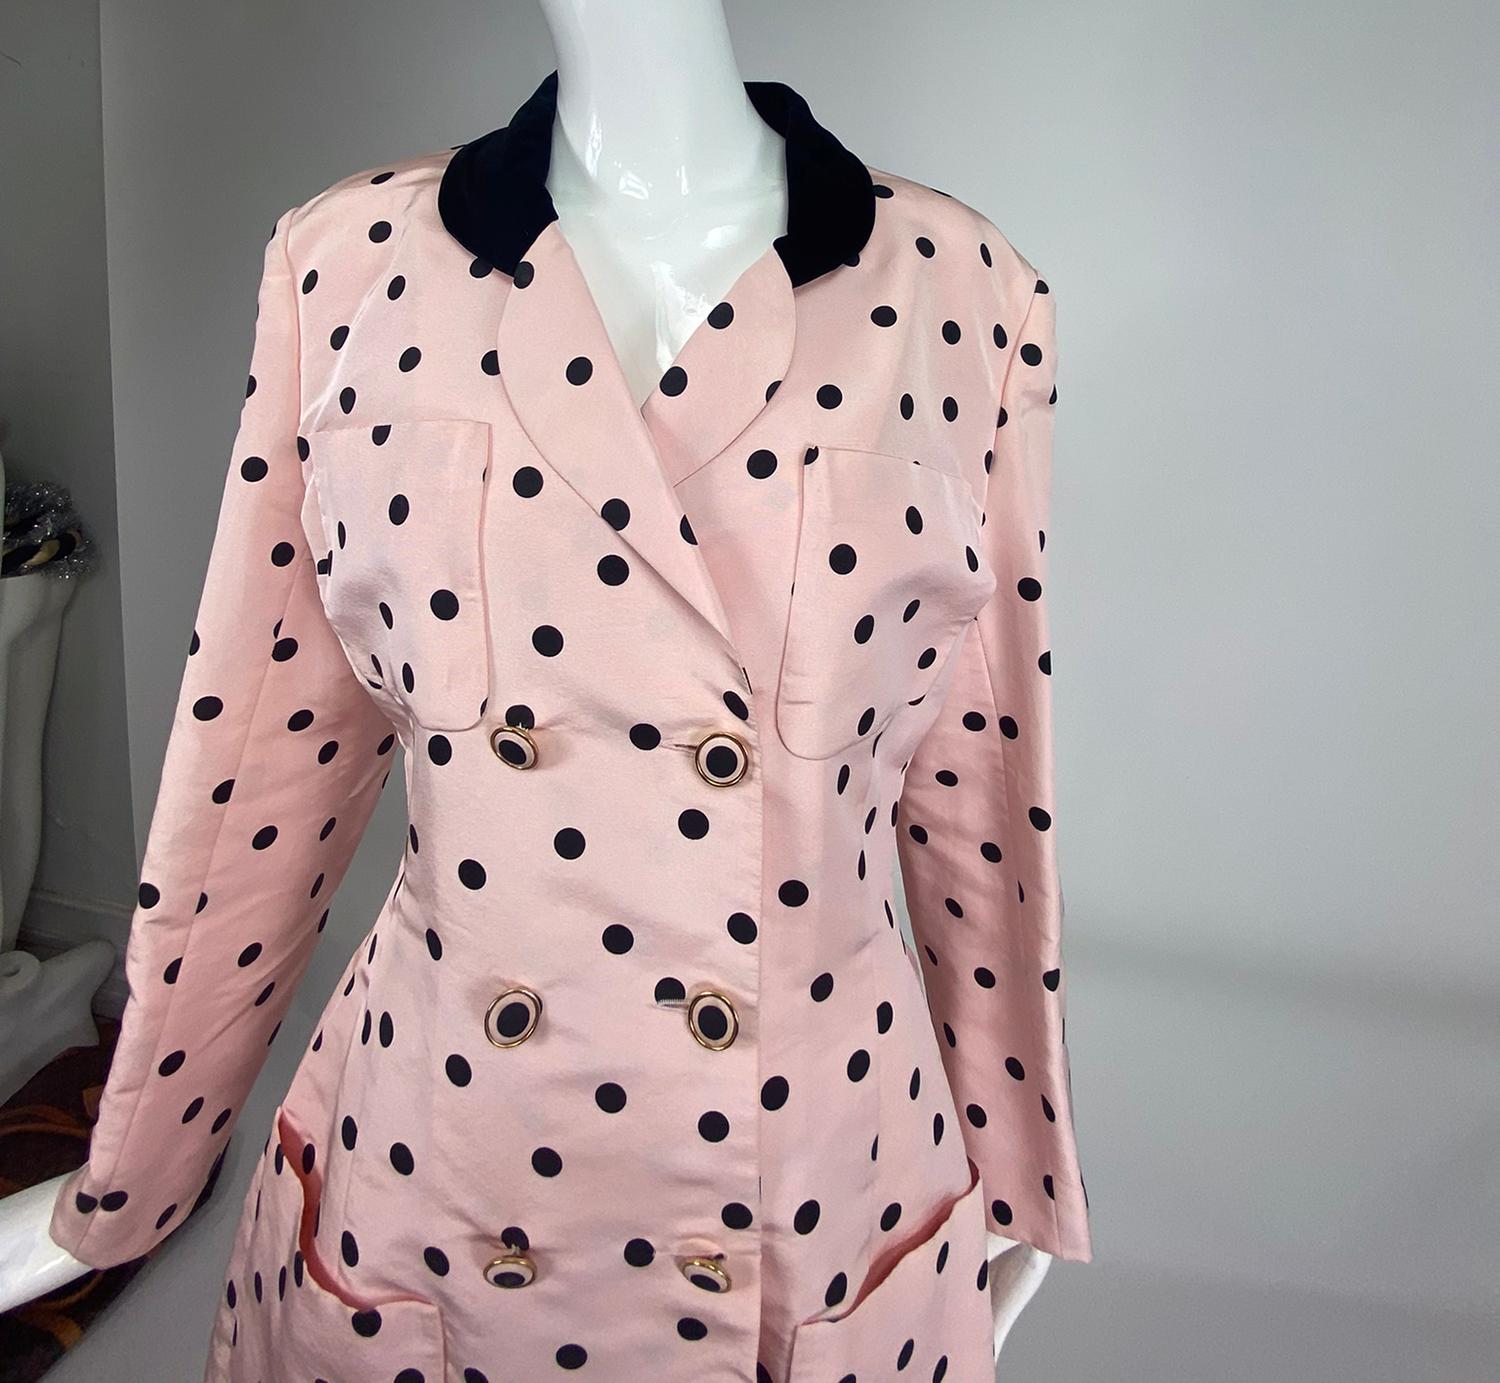 Chanel Fitted Silk Faille Pink & Black Dot Jacket 1990s 3